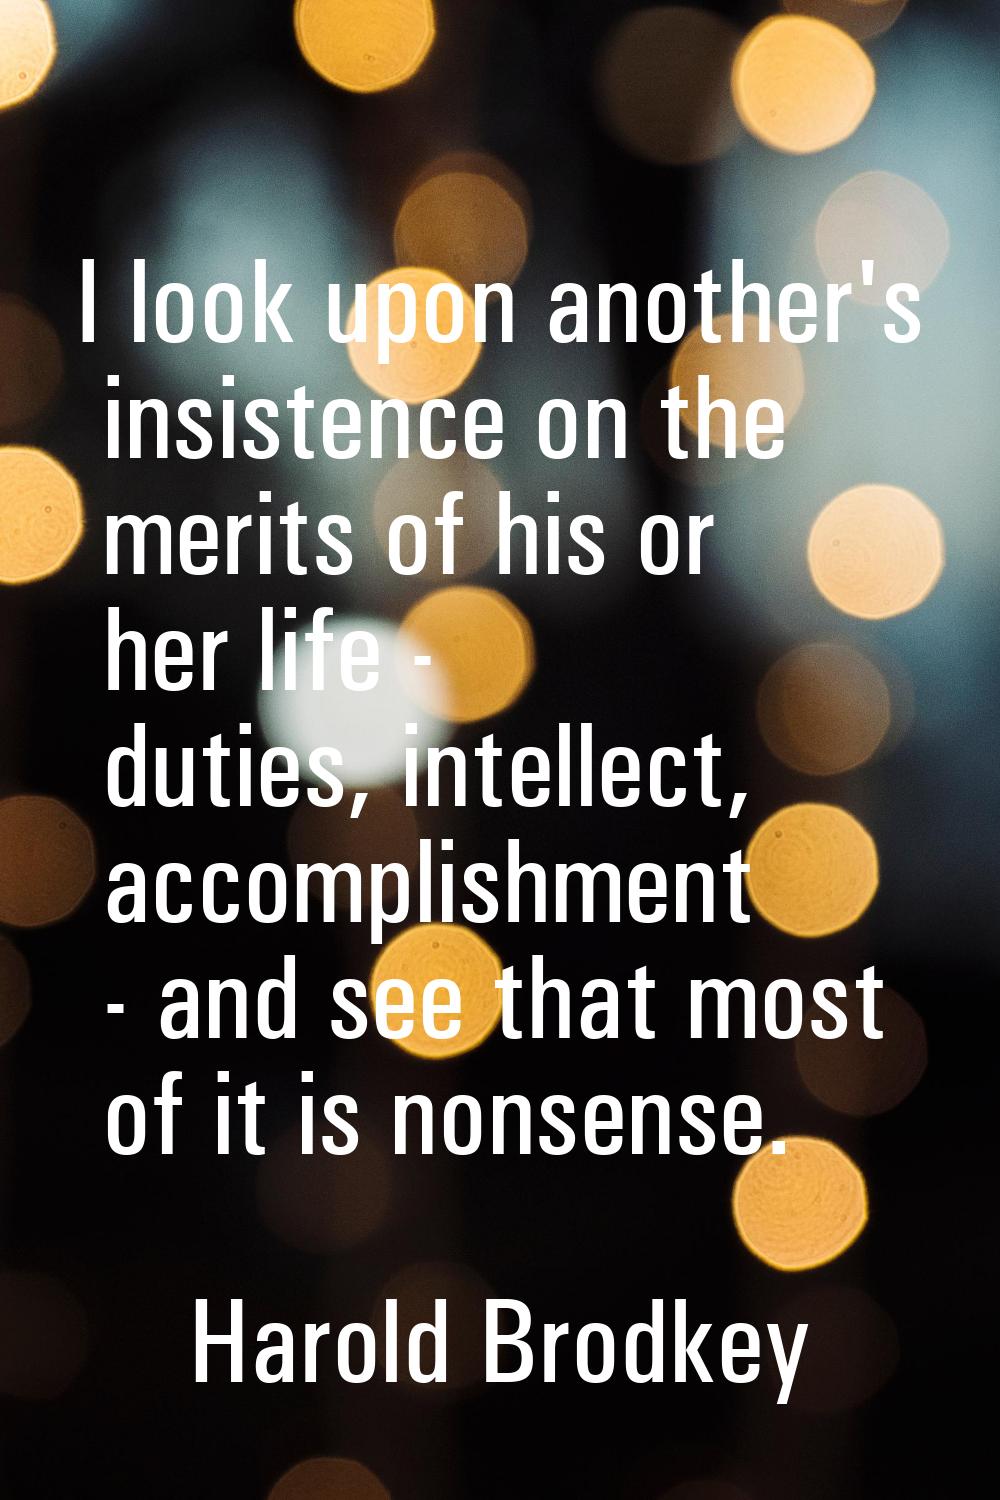 I look upon another's insistence on the merits of his or her life - duties, intellect, accomplishme